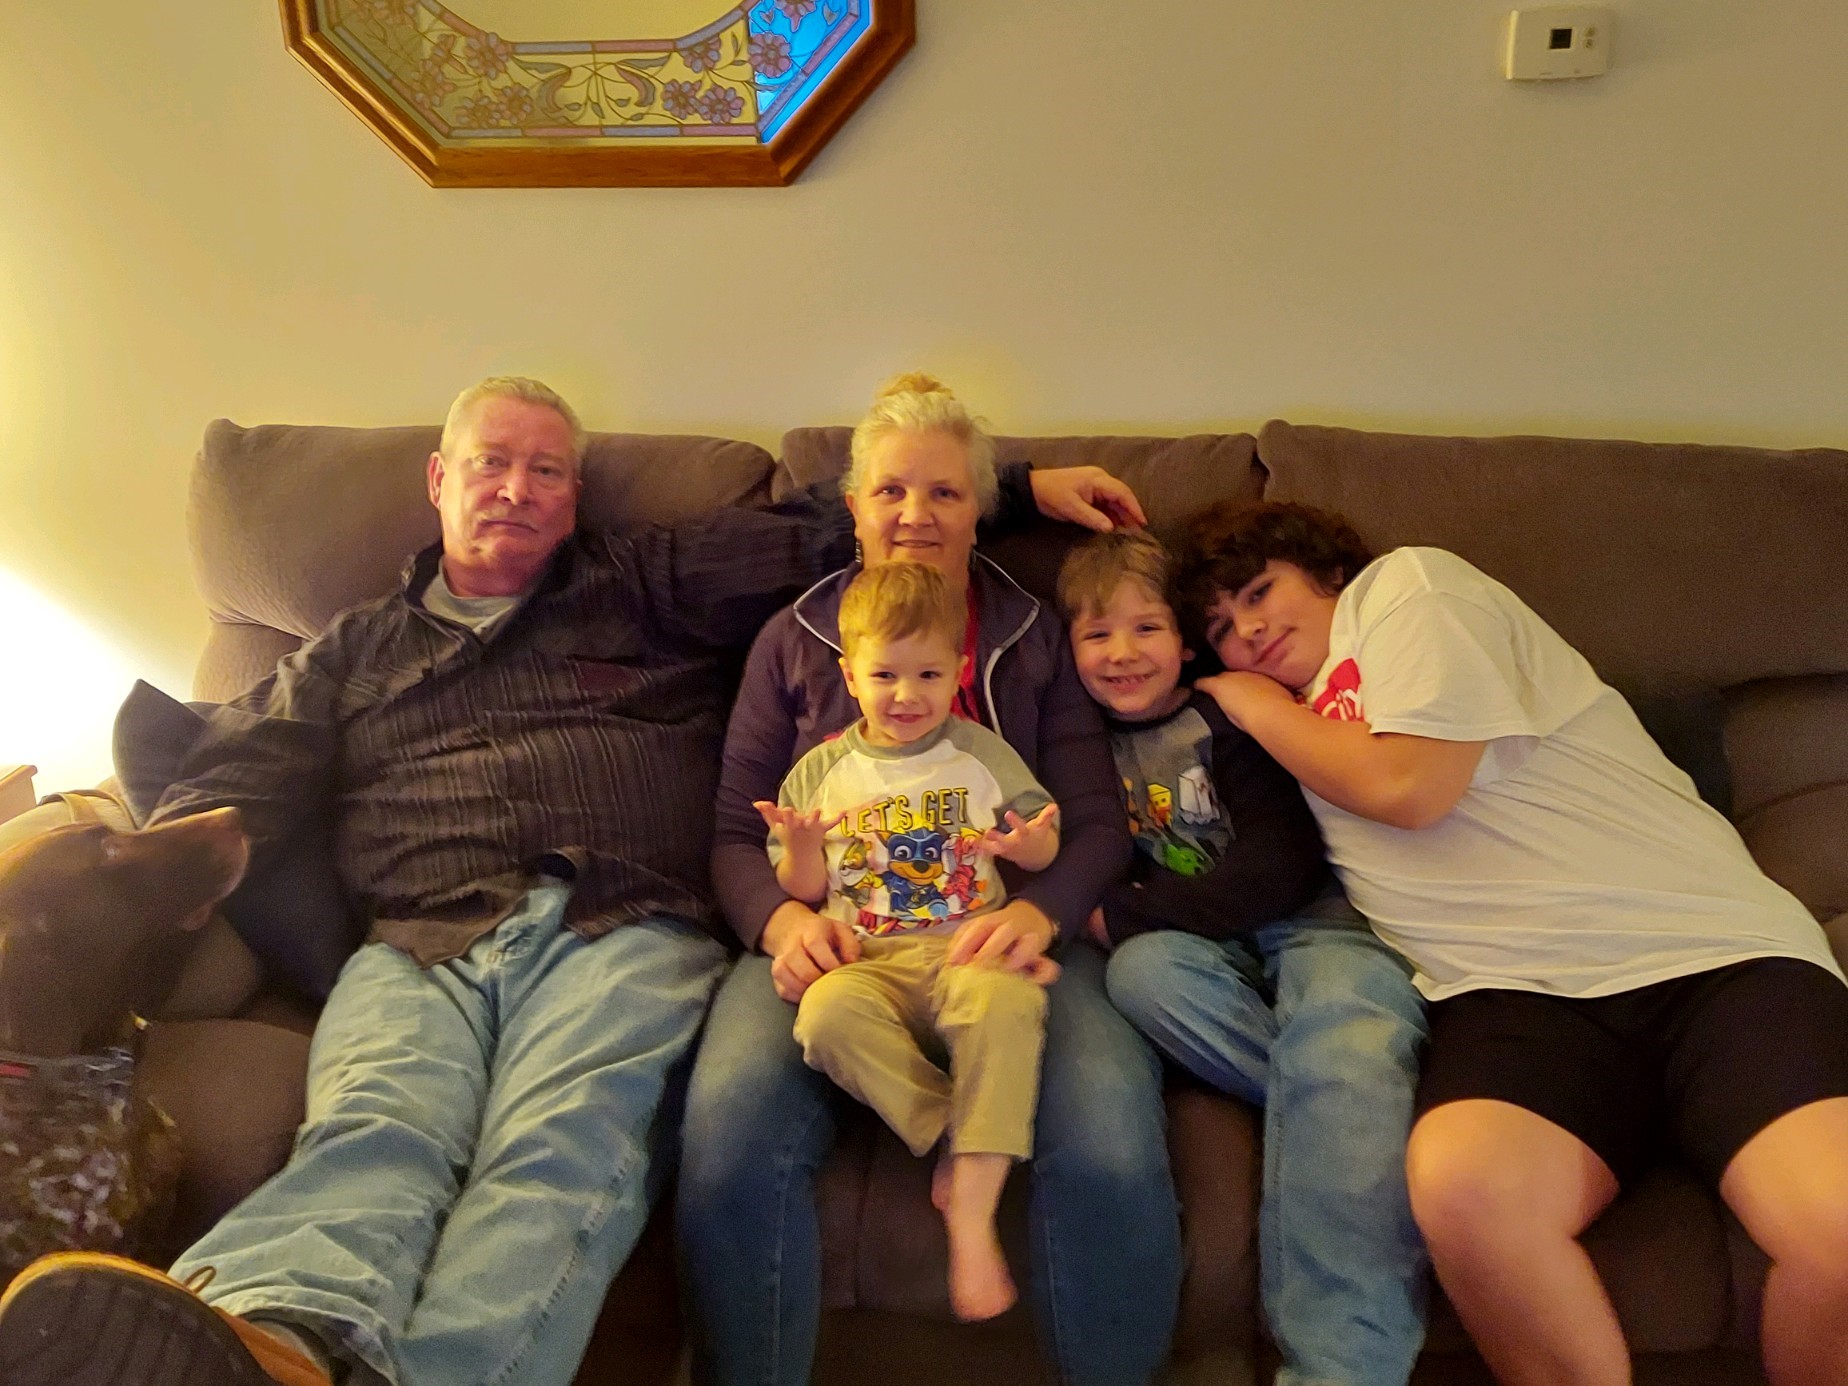 Patricia with her husband and 3 grandsons sitting on a couch